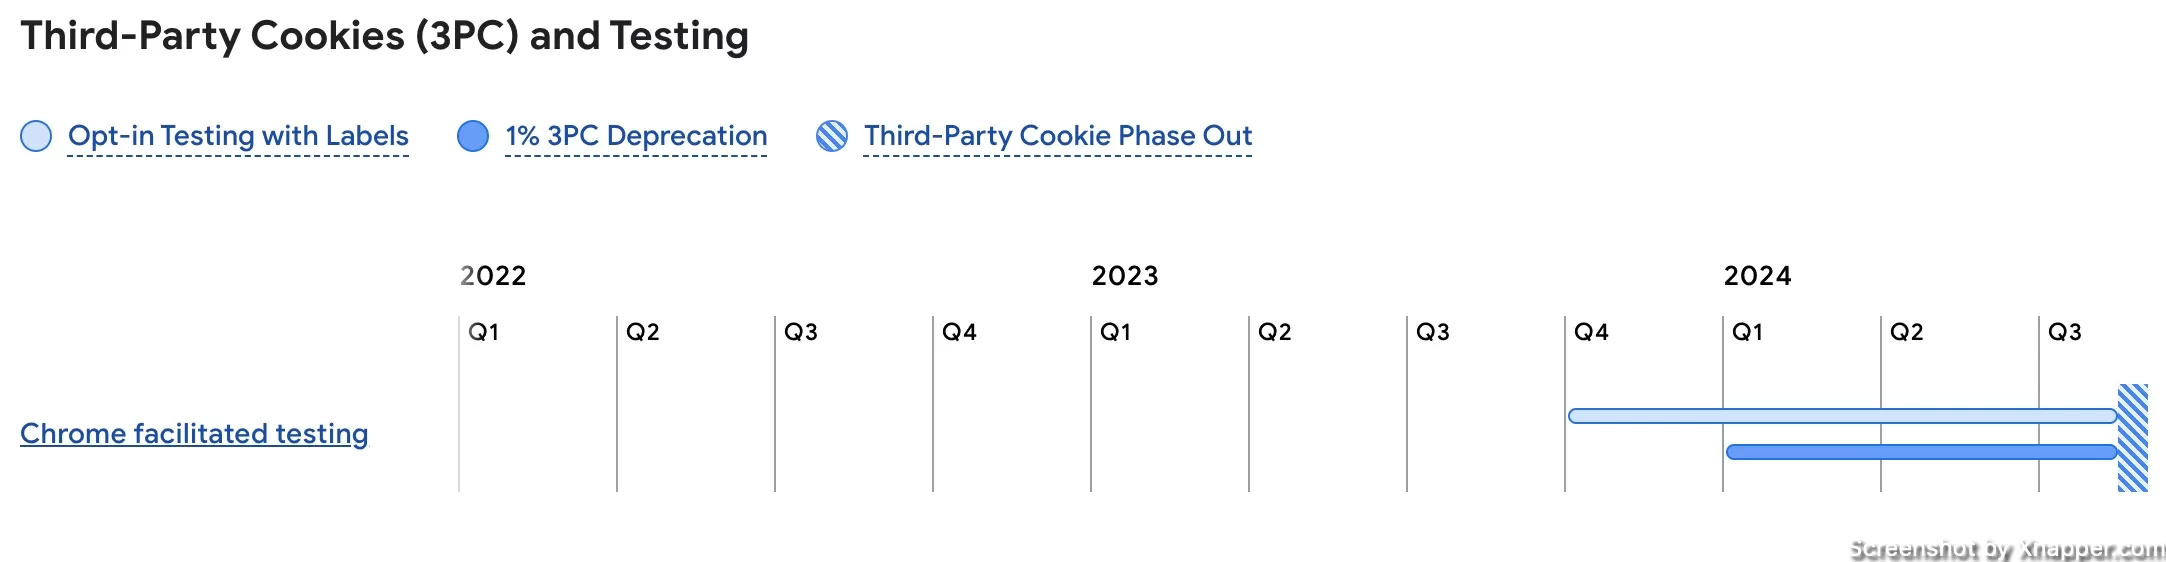 third-party cookie phase out periods